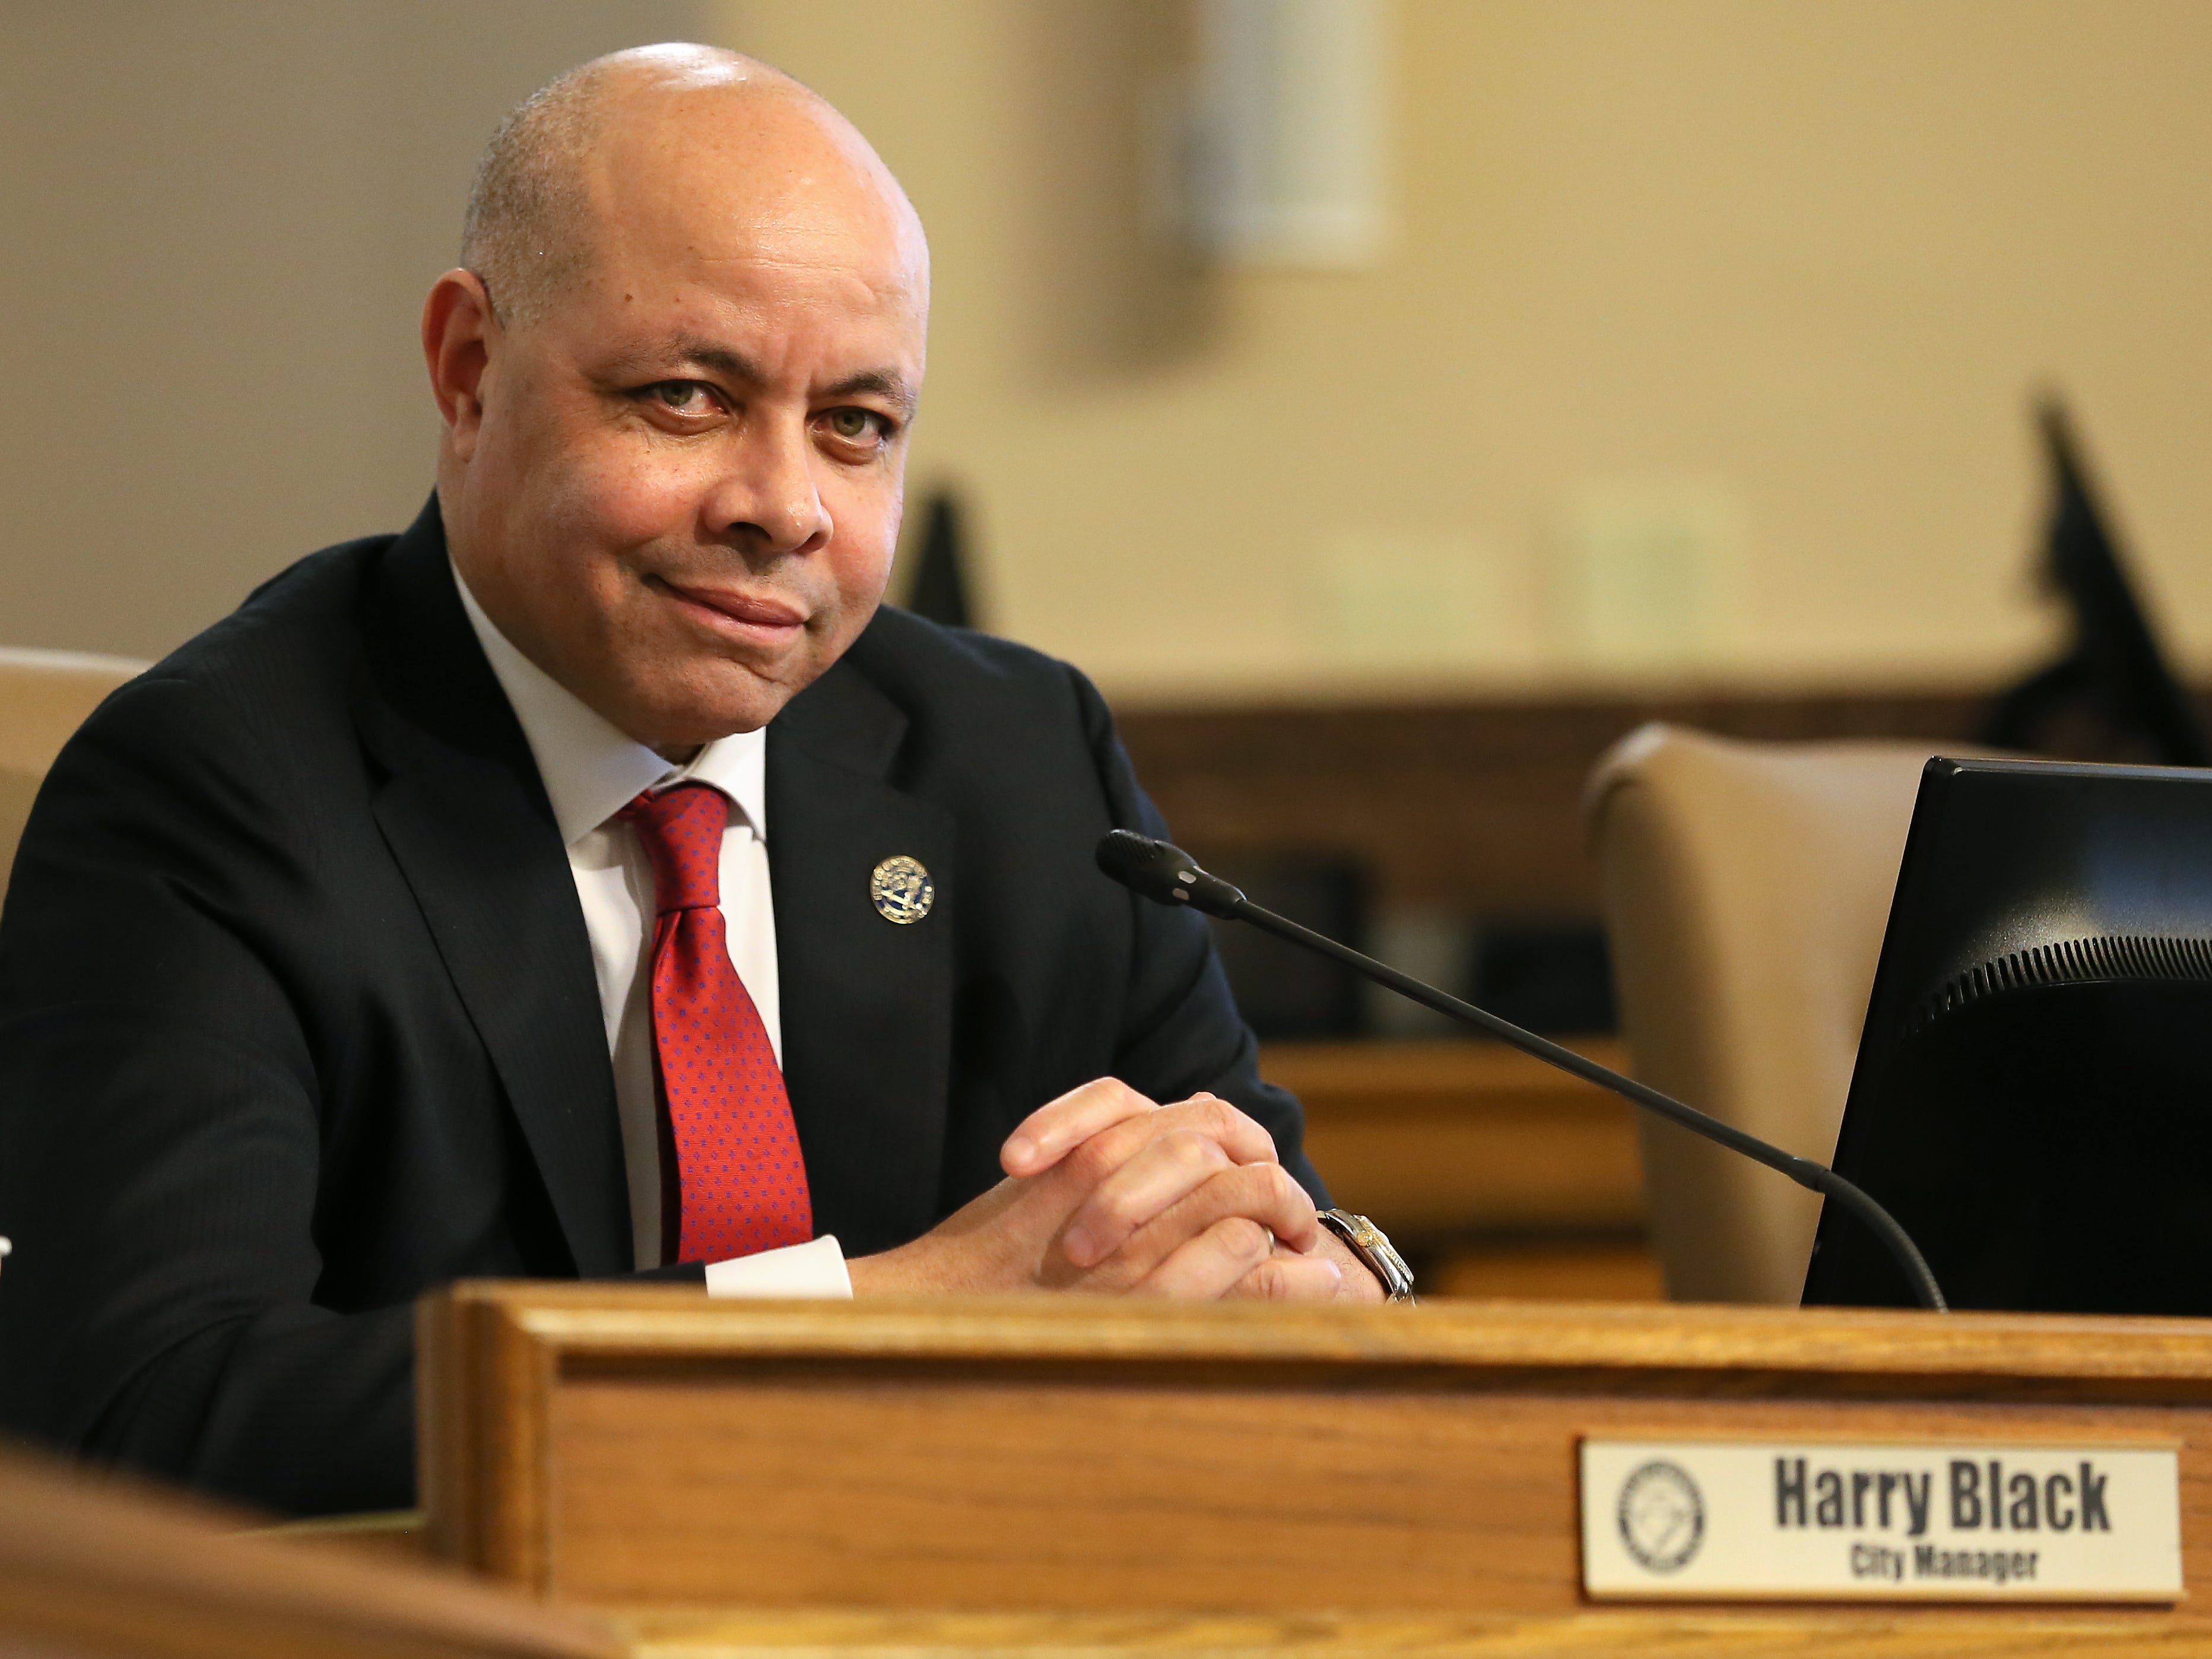 Cincinnati City Manager Harry Black resigns before council meeting to fire him